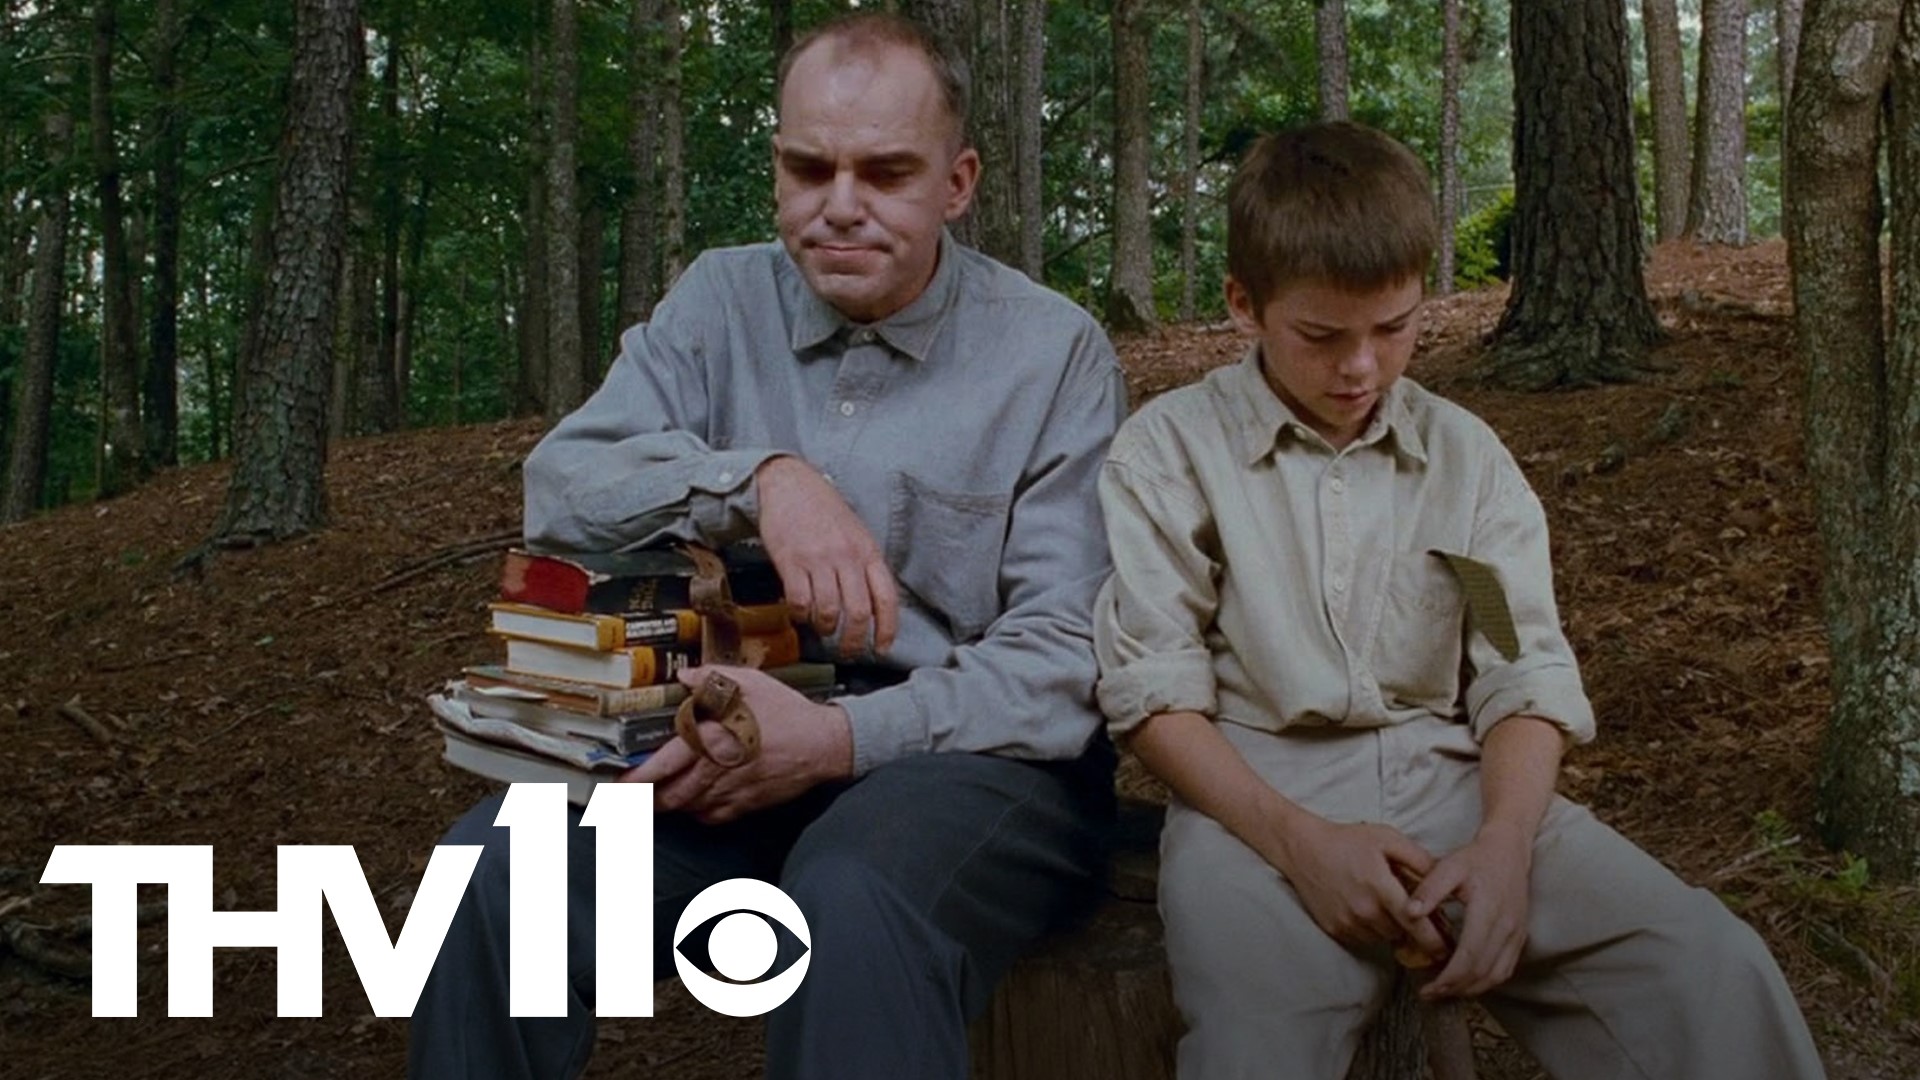 When Sling Blade hit theaters in 1996, it set the tone for movies set in the South and catapulted Billy Bob Thornton to stardom.